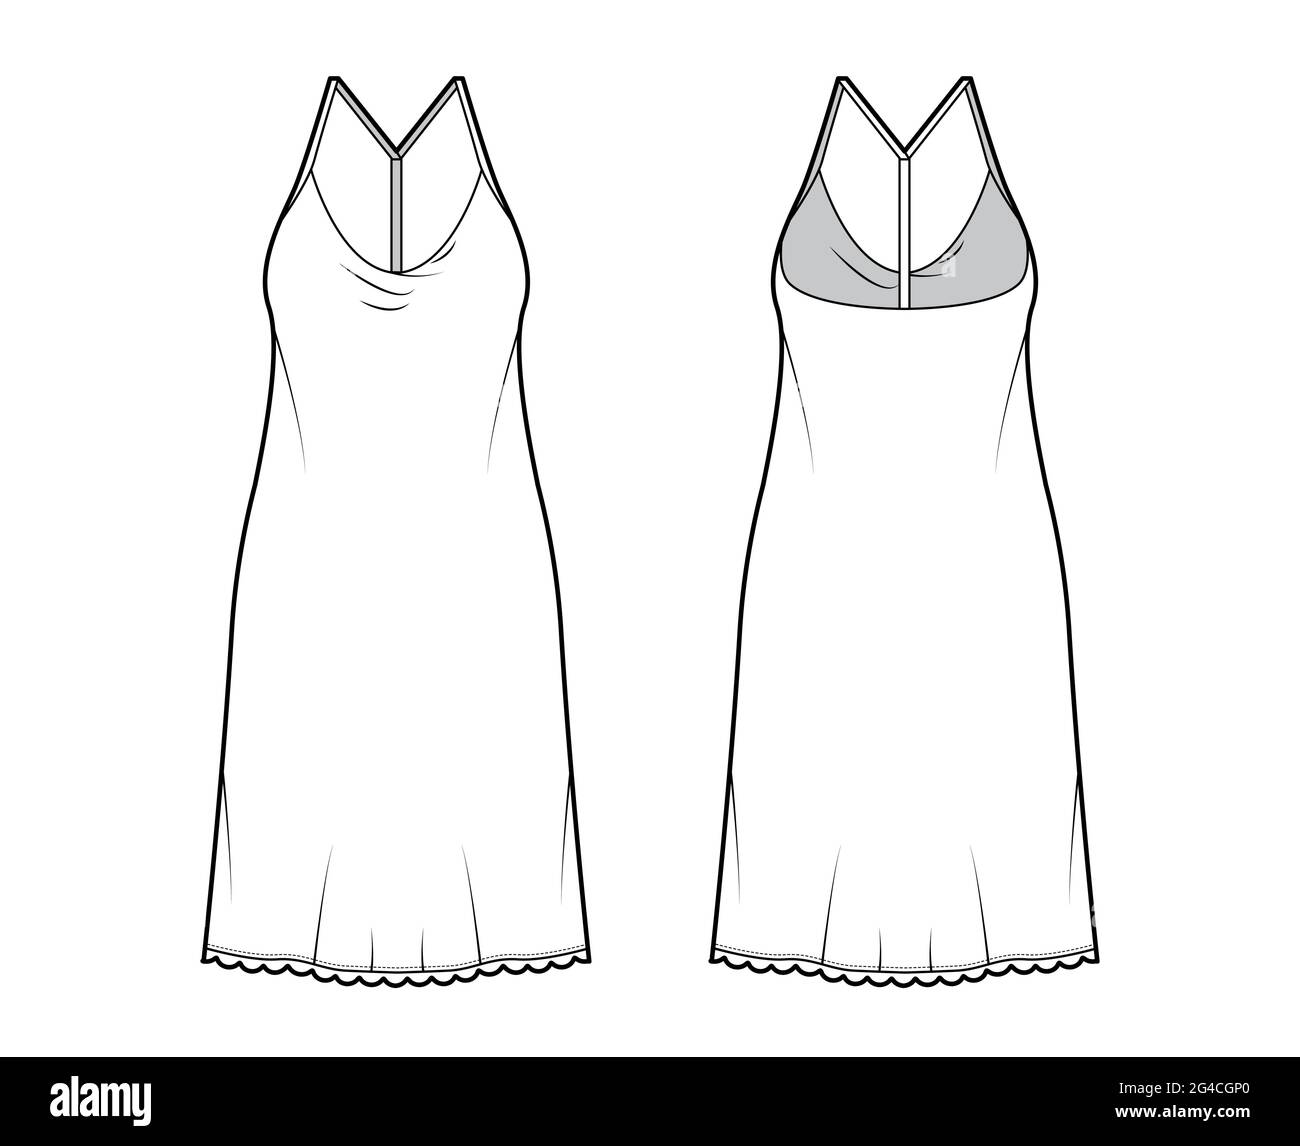 Dress slip technical fashion illustration with oversized body, knee length pencil skirt, racerback. Flat apparel front, back, white color style. Women Stock Vector